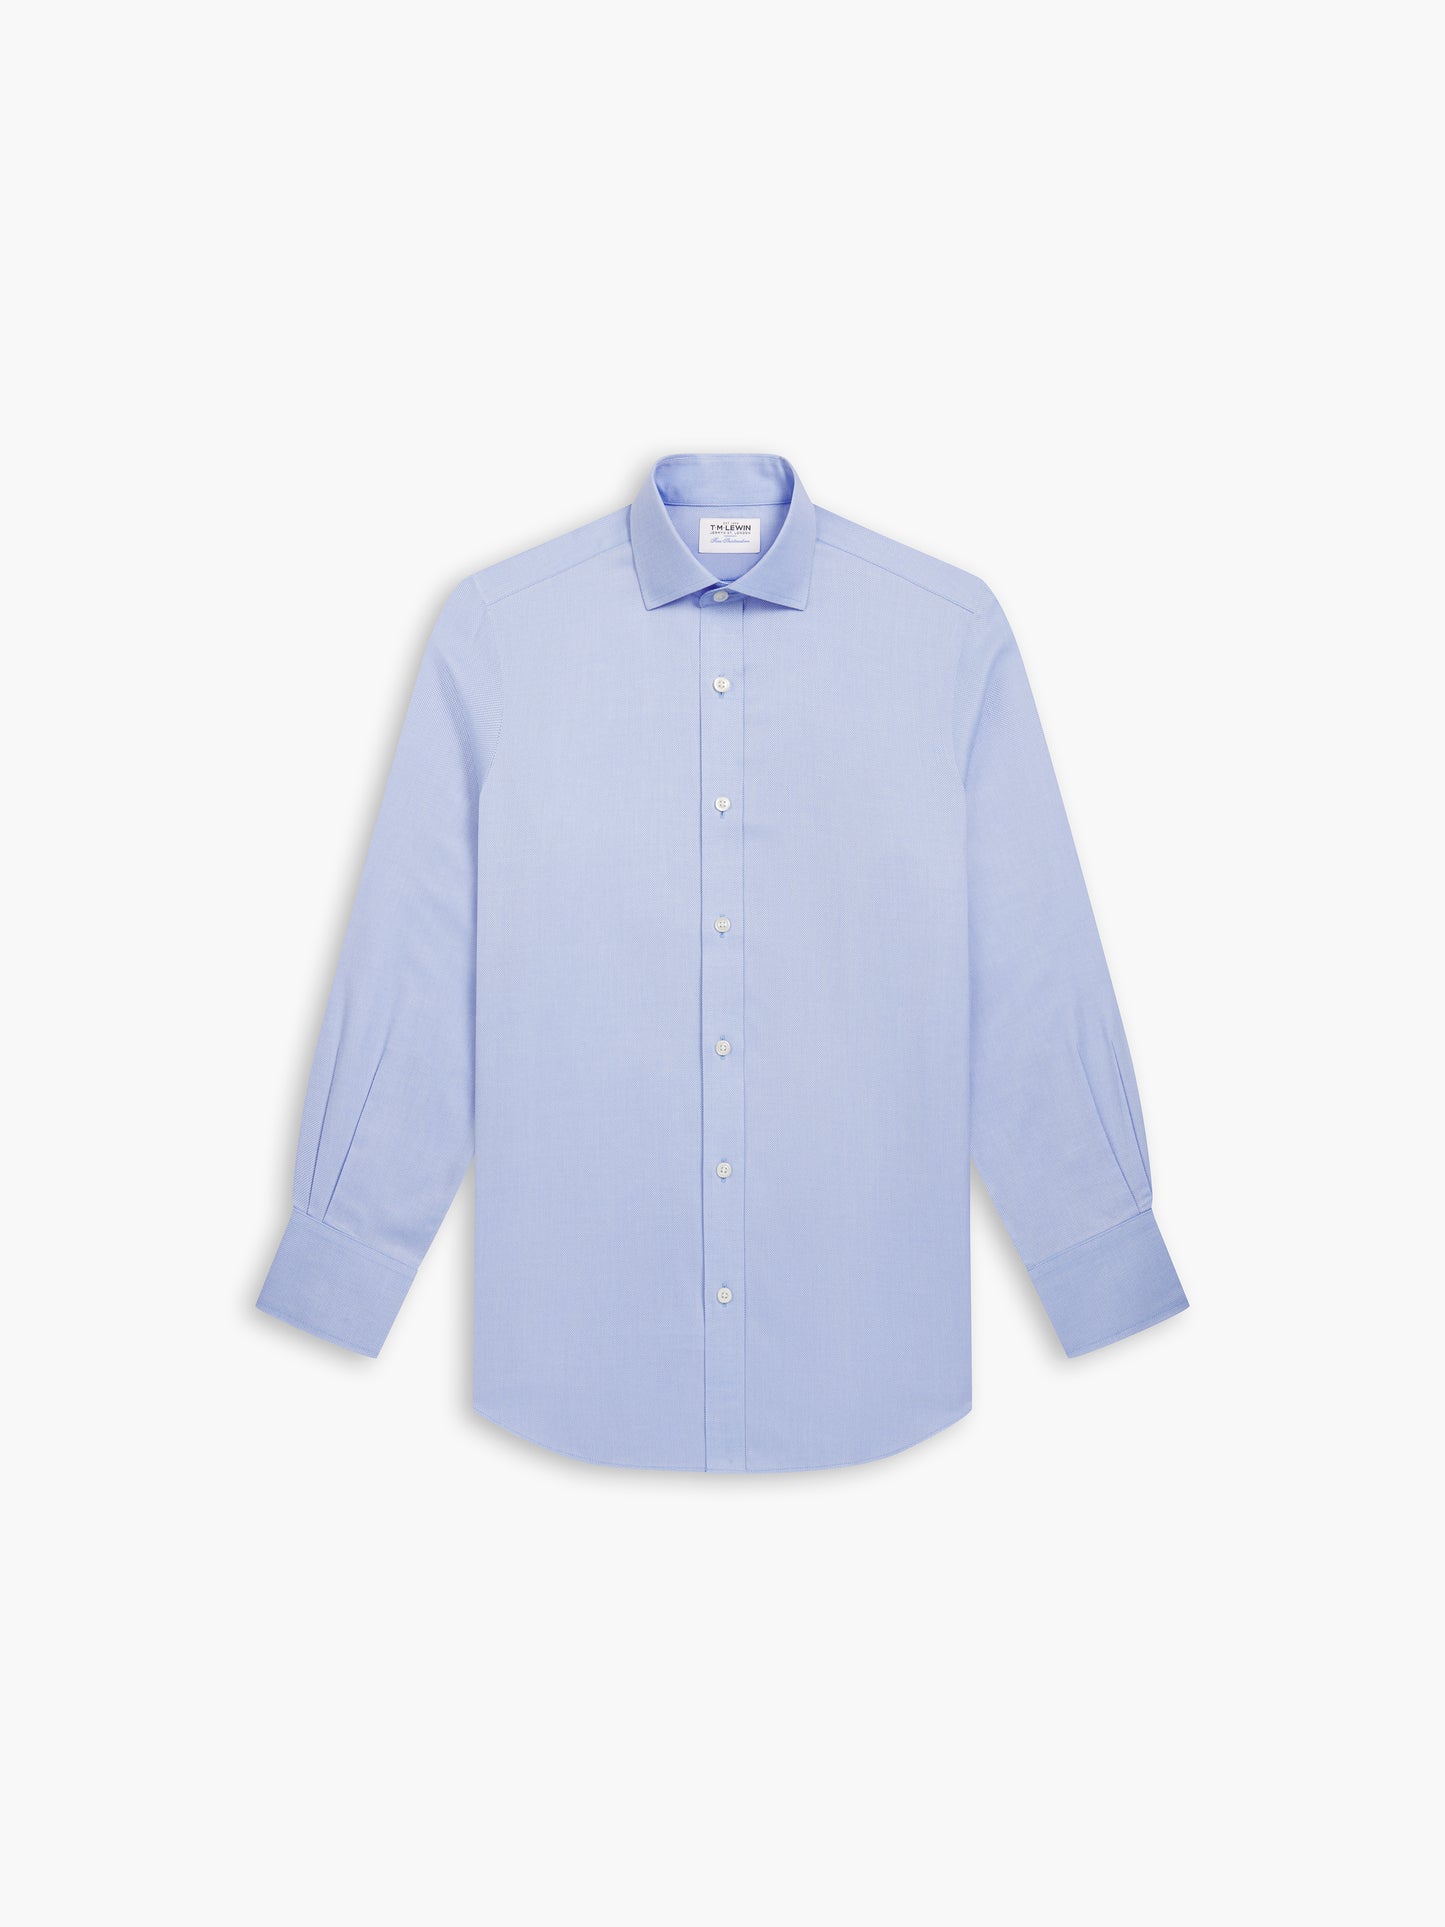 Image 2 of Non-Iron Blue Royal Oxford Fitted Single Cuff Classic Collar Shirt